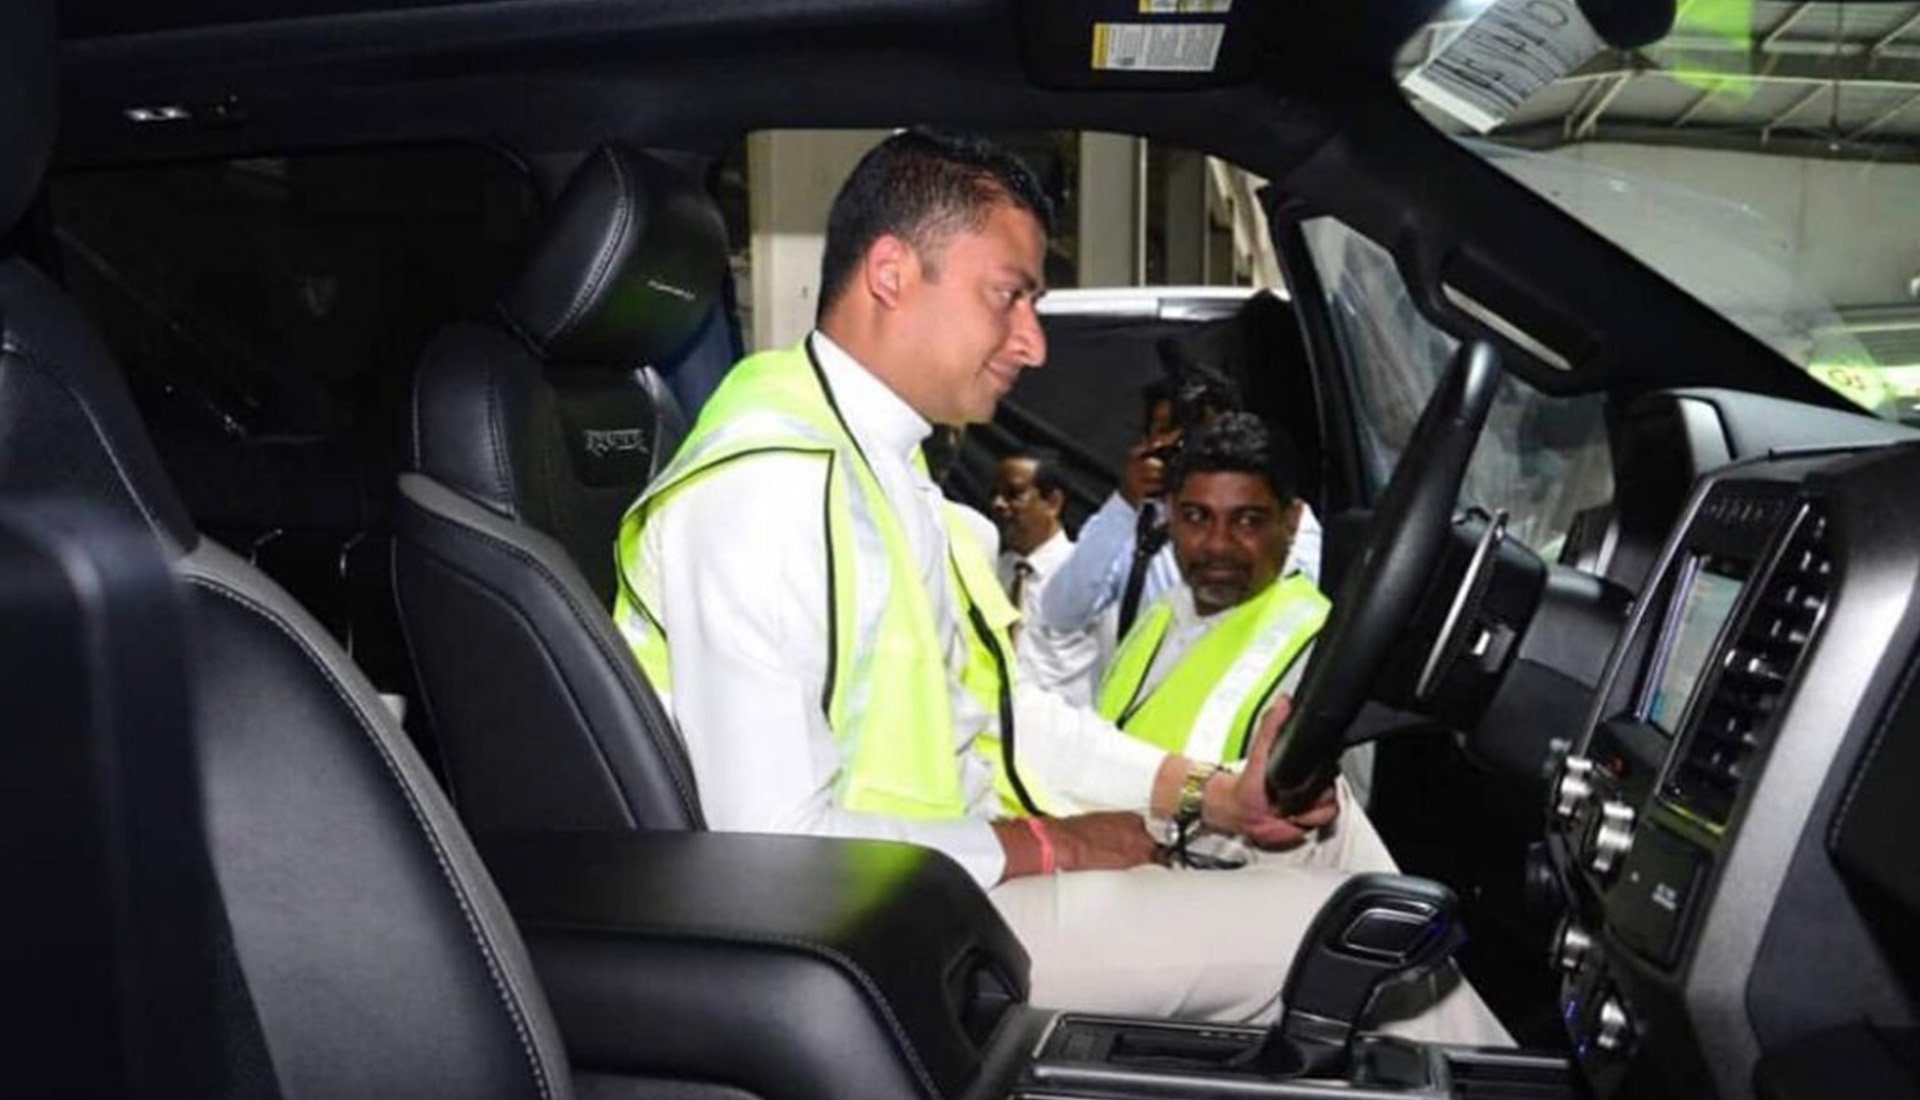 Men in high-visibility vests inspecting luxury vehicle interior.